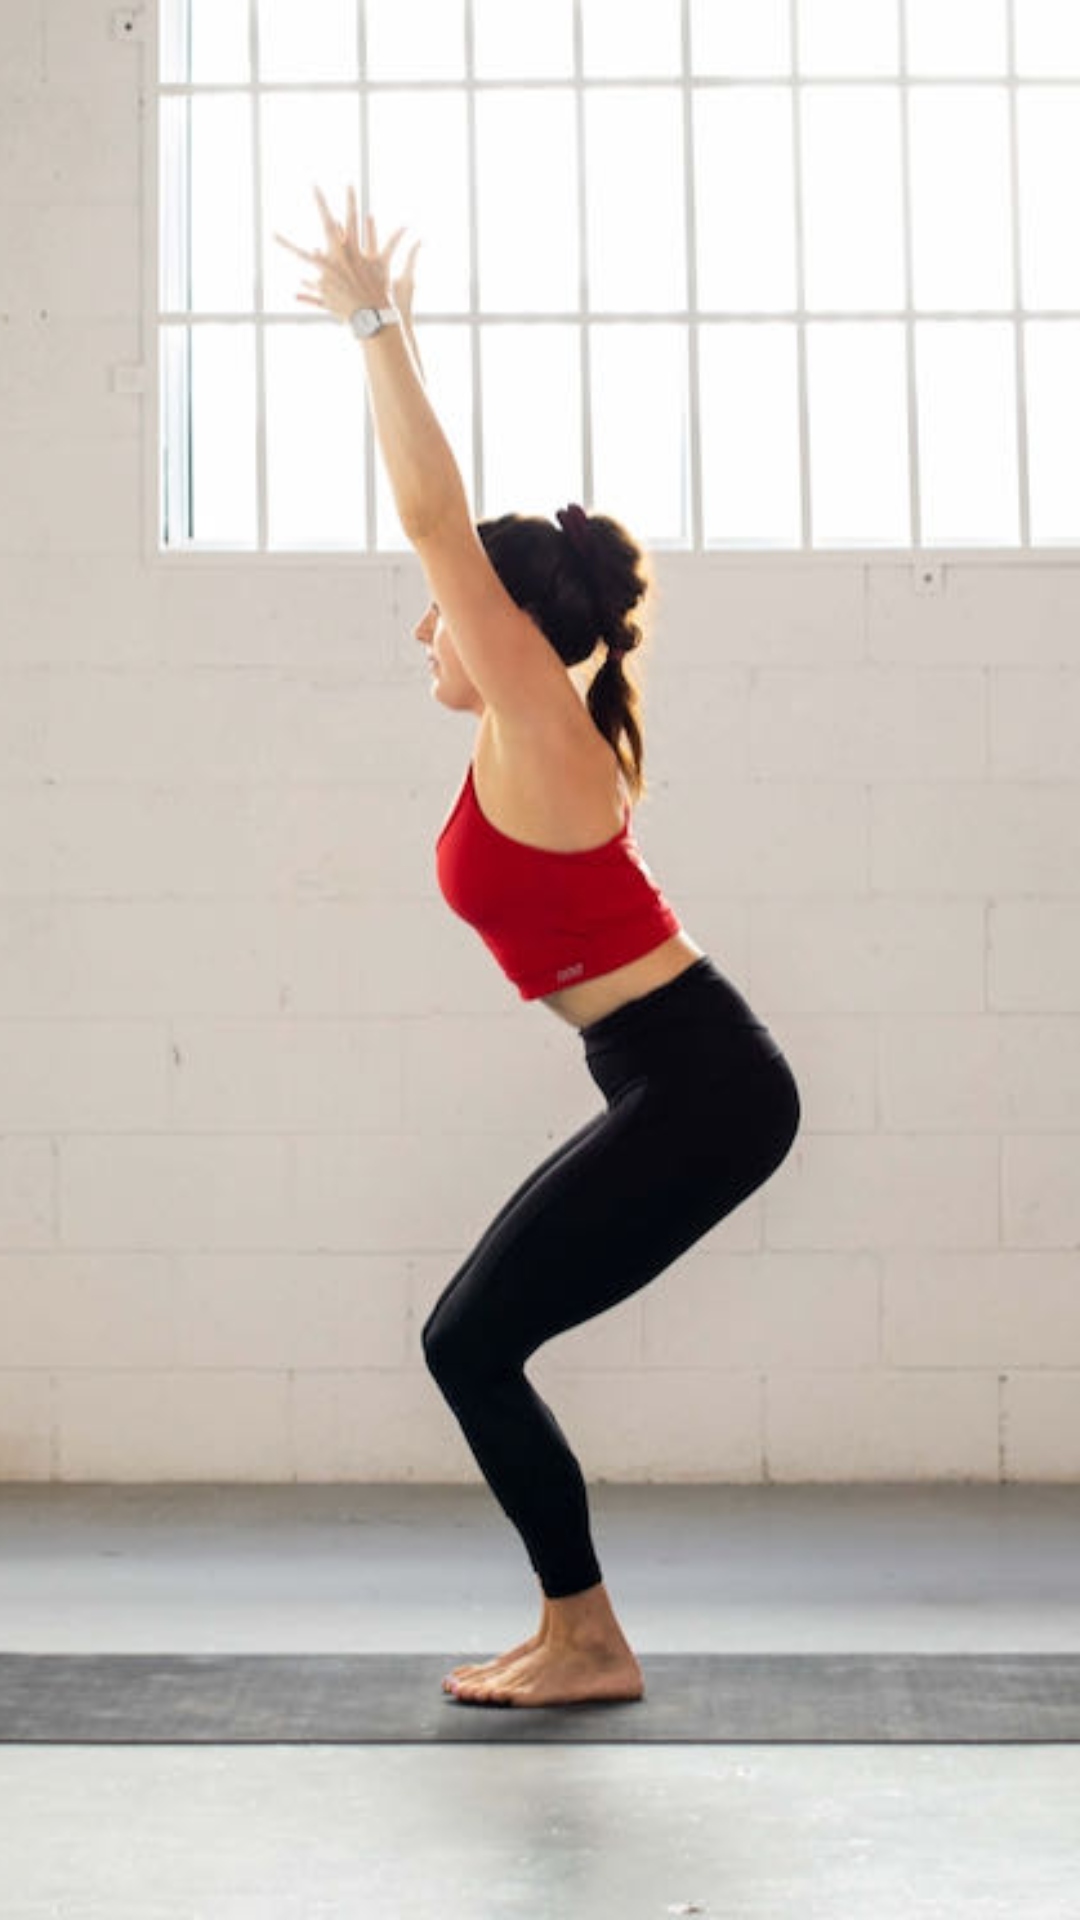 5 yoga asanas to strengthen and tone your glutes